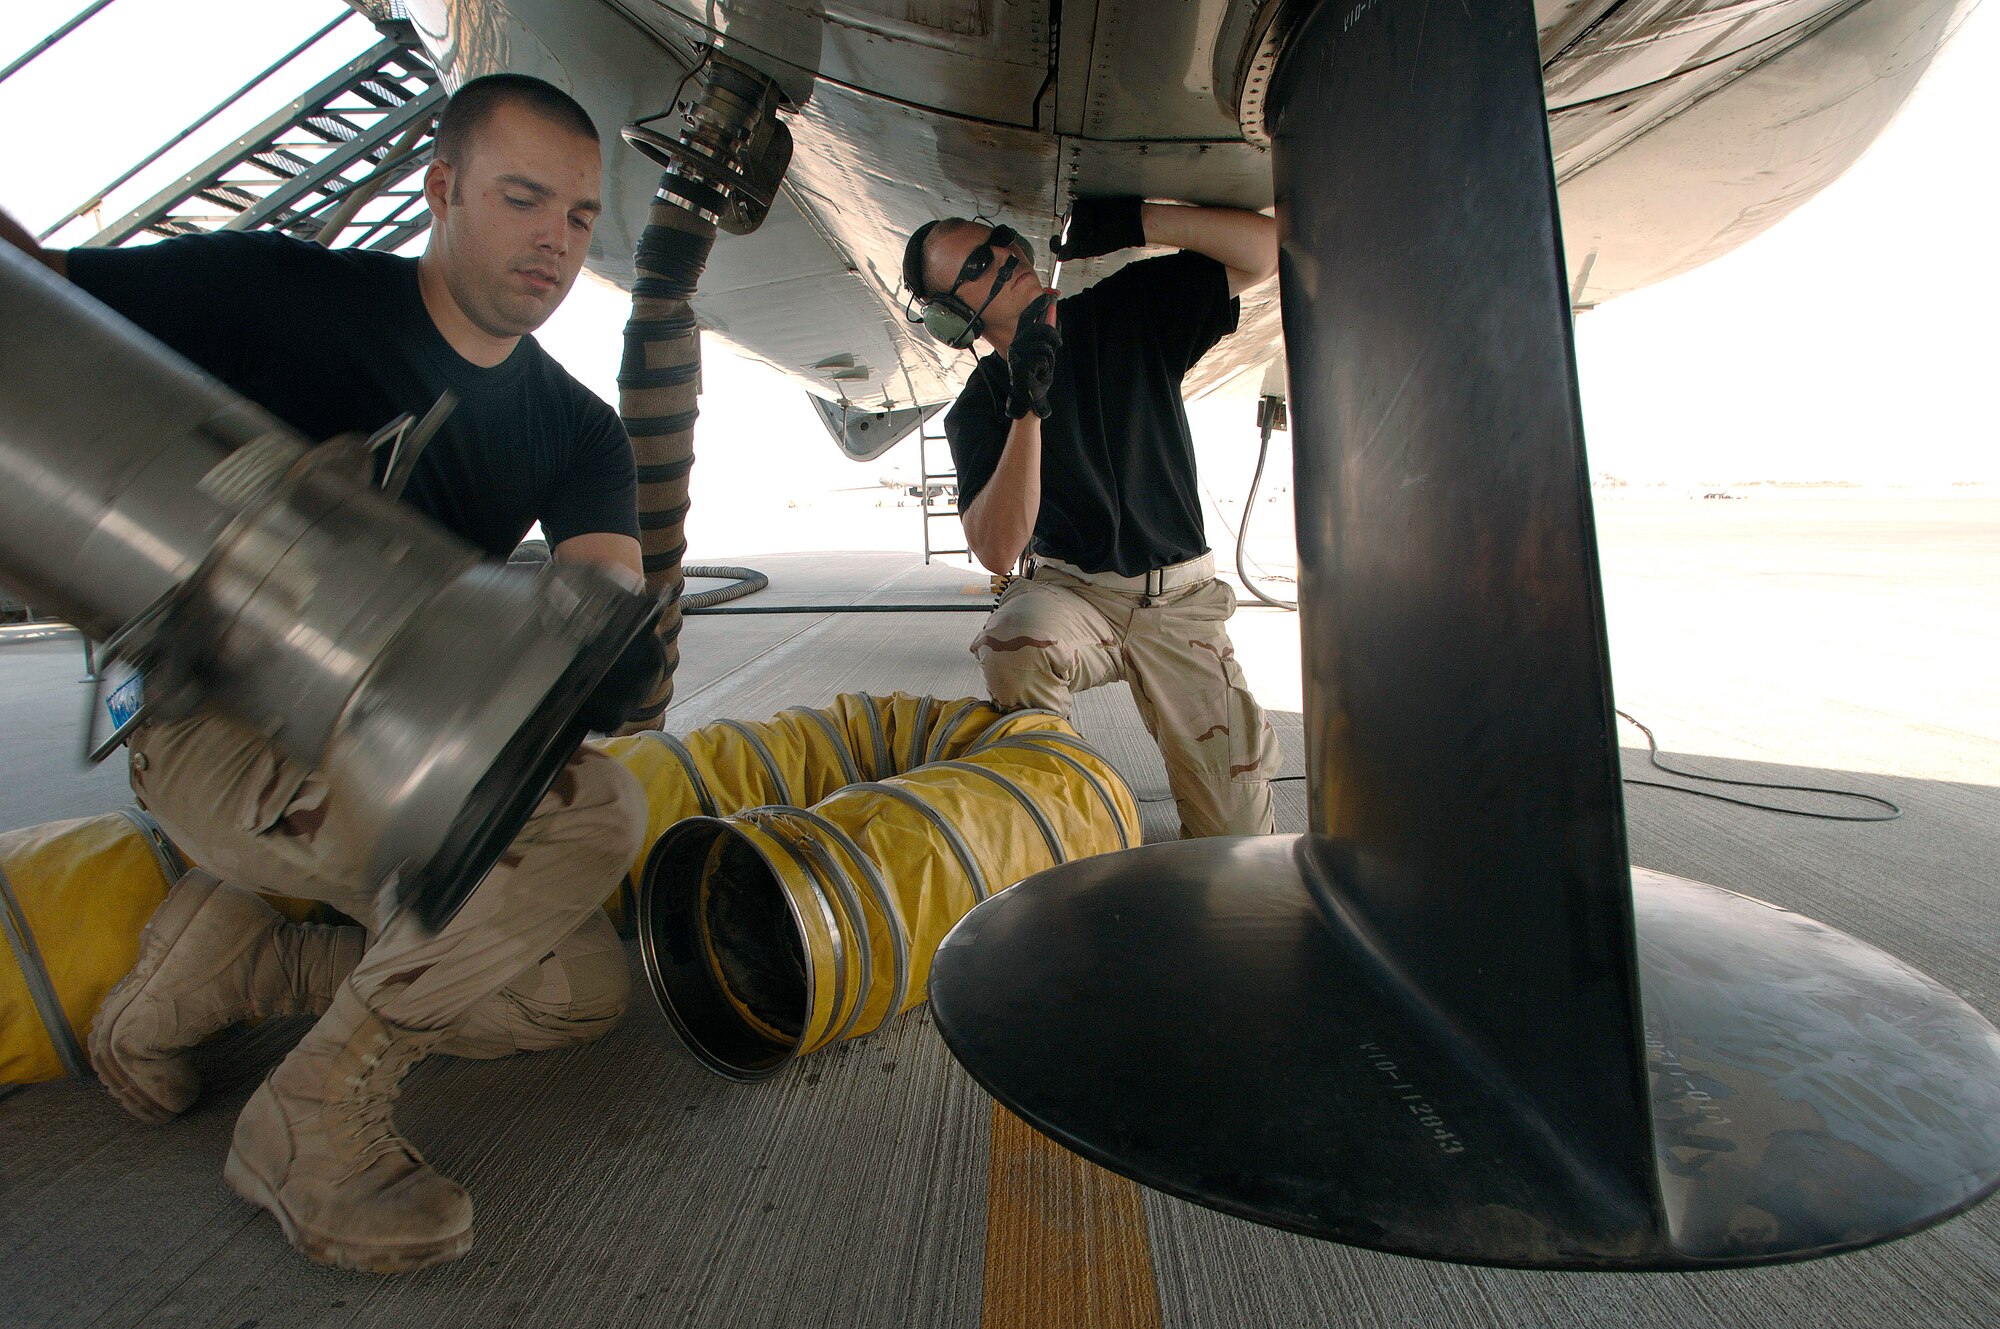 Senior Airman Matthew Campbell and Airman 1st Class Jonathan Campana remove air conditioning hoses from an RC-135 Rivet Joint reconnaissance aircraft prior to its departure for a mission over Southwest Asia.  The air conditioning system helps maintain cool temperatures for the extensive electronics onboard the plane during the lengthy start up process. Both Airmen are crew chiefs deployed from the 55th Aircraft Maintenance Squadron, Offutt Air Force Base, Neb. (U.S. Air Force photo/Master Sgt. Scott Wagers)